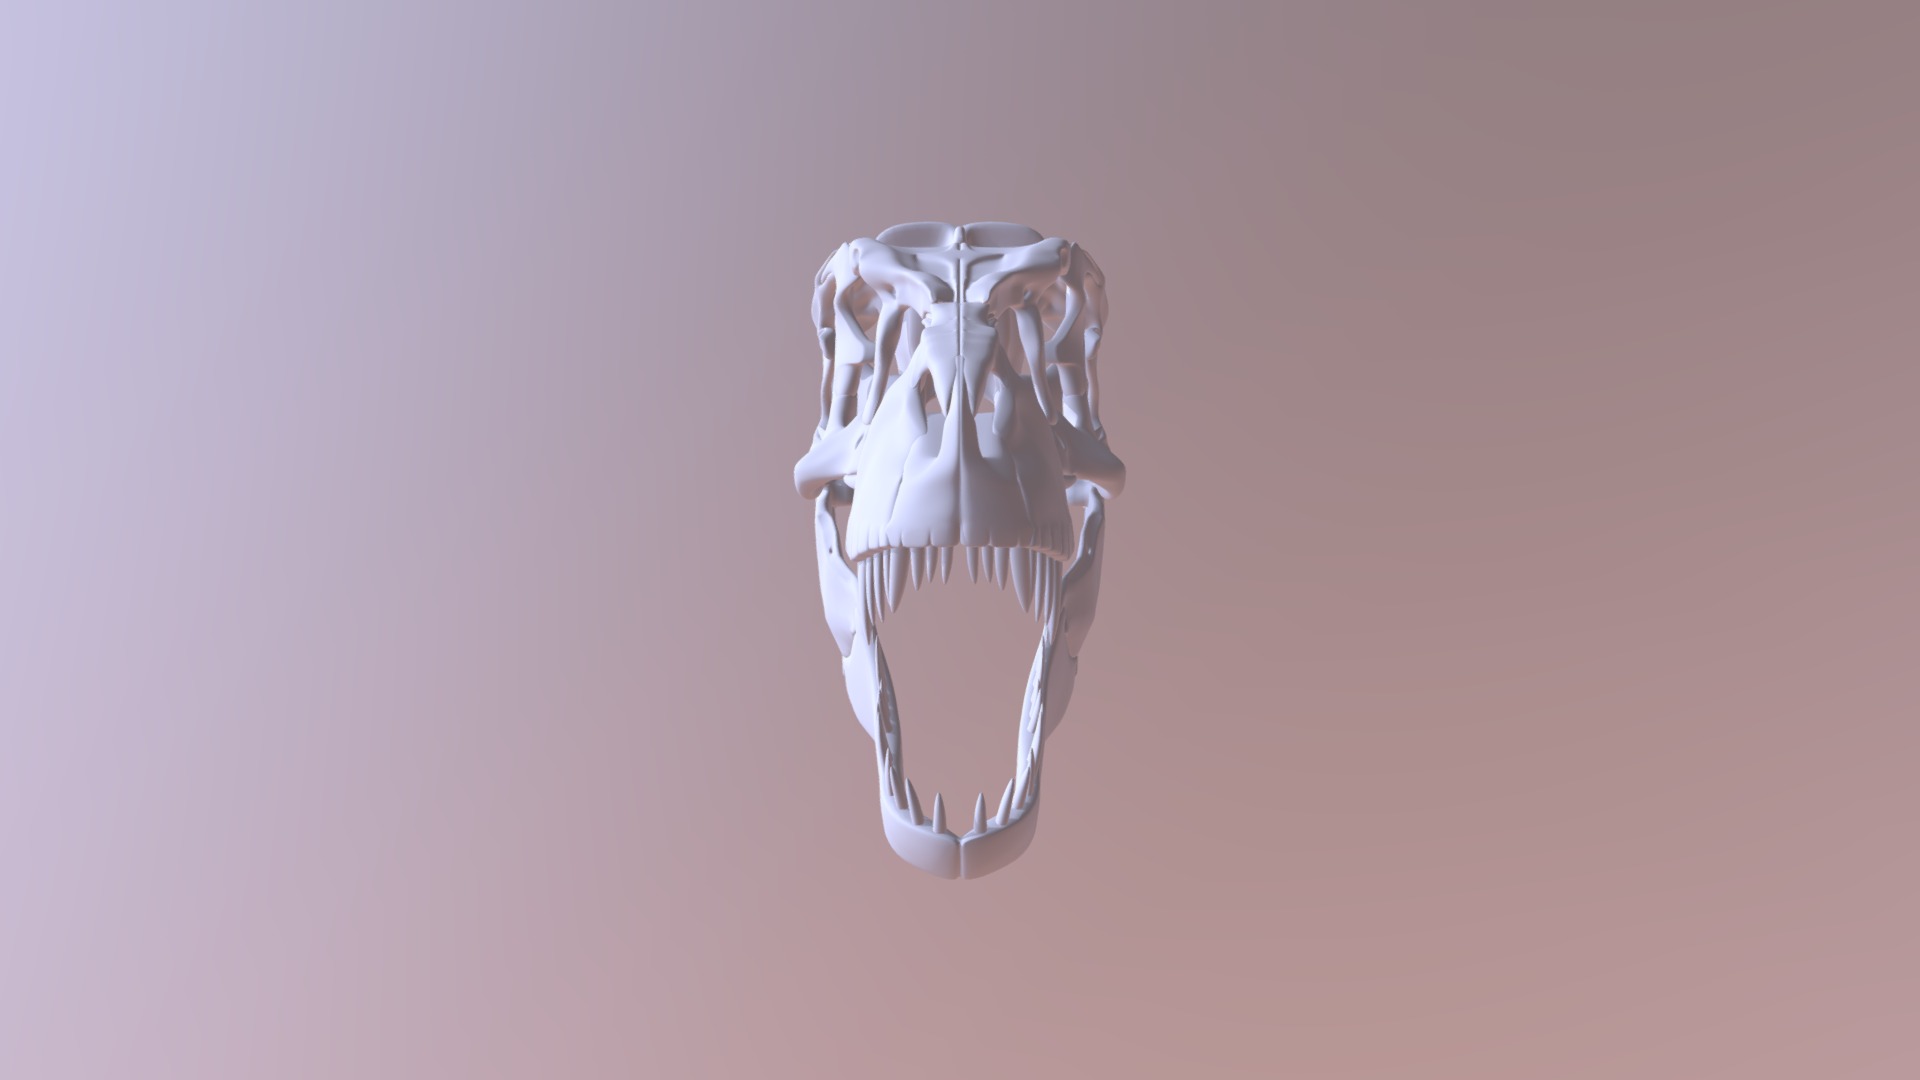 3D model Tyrannosaurus rex Skull - This is a 3D model of the Tyrannosaurus rex Skull. The 3D model is about a white skull with a white background.